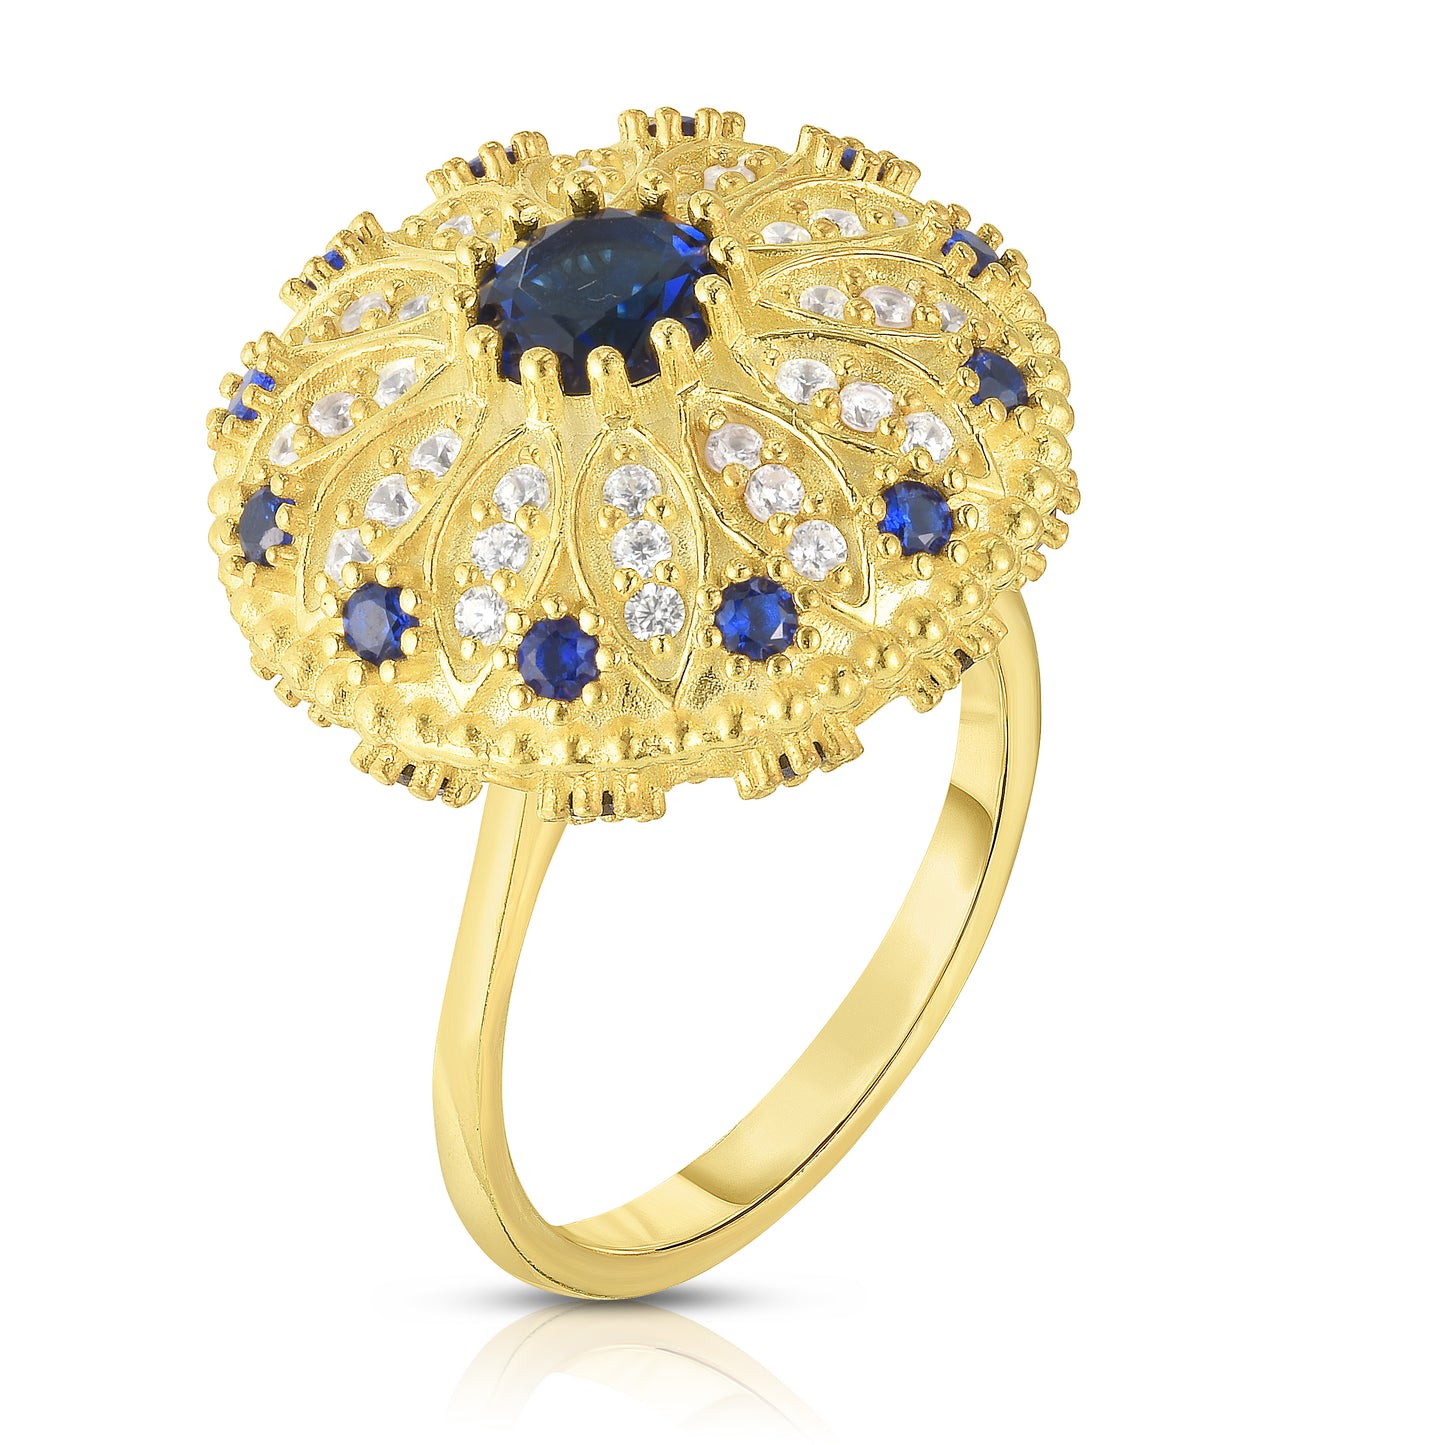 OVNI Cocktail Ring